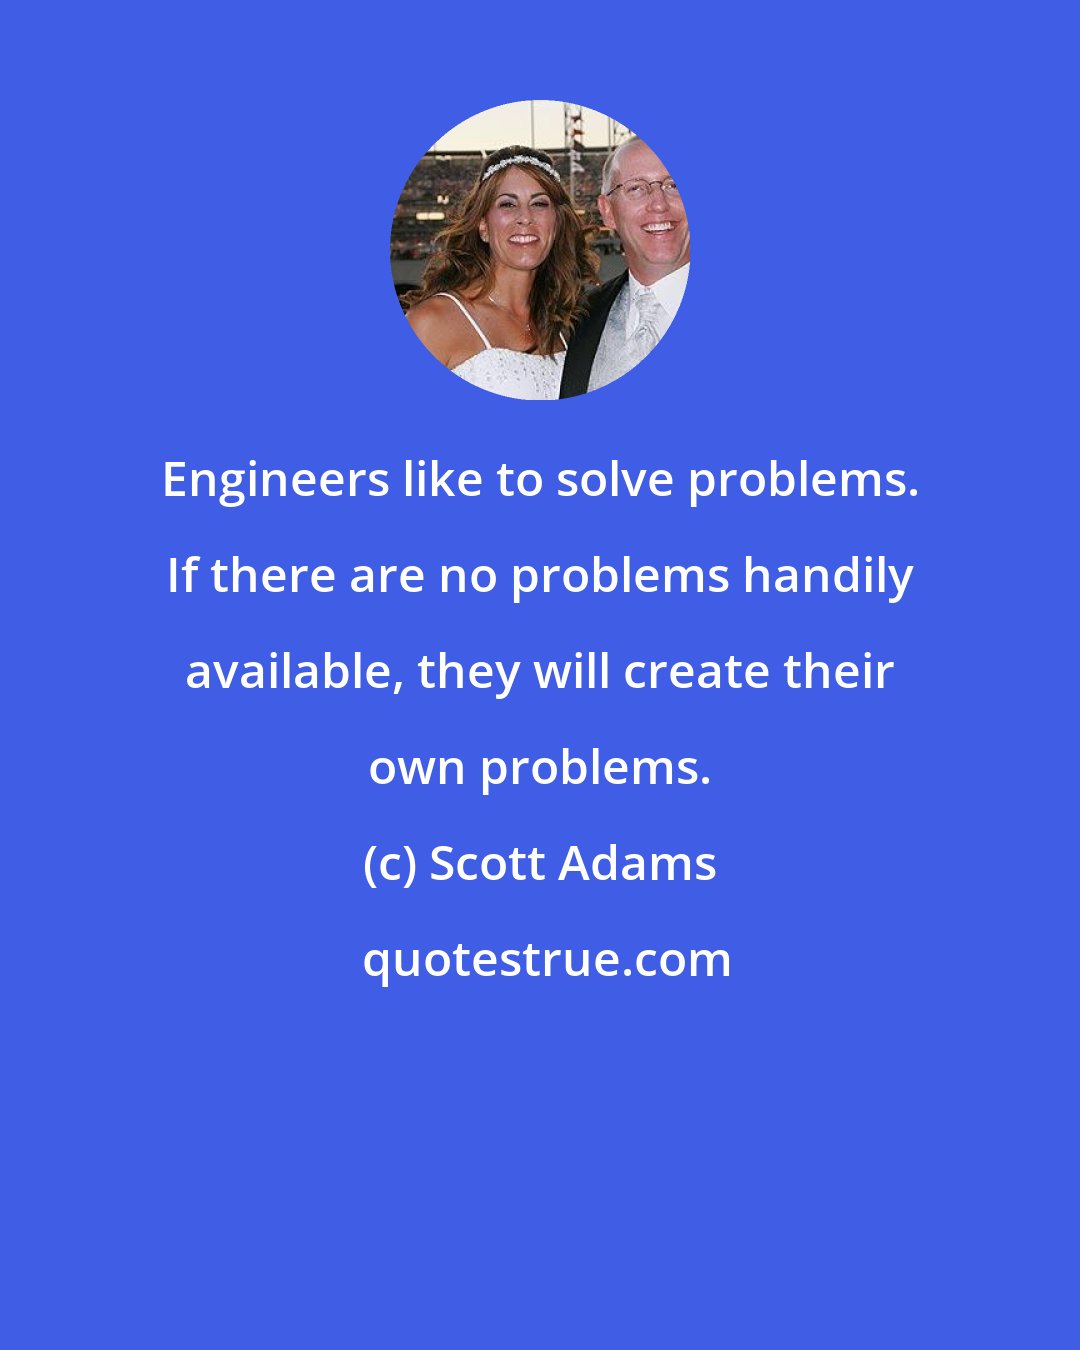 Scott Adams: Engineers like to solve problems. If there are no problems handily available, they will create their own problems.